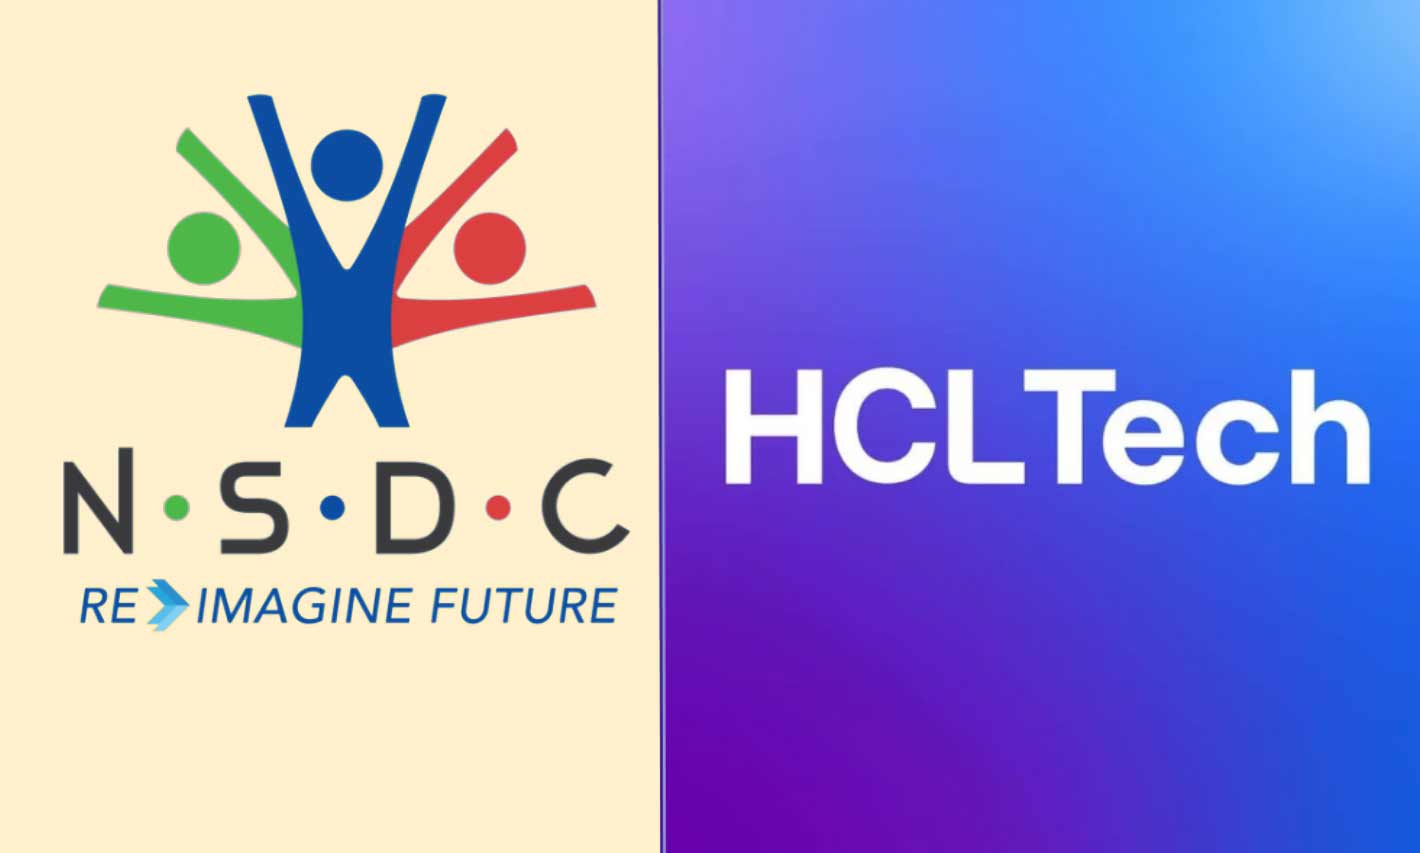 NSDC Partners HCLTech to Transform Job Markets From Qualification-Based to Skill-Based Hiring